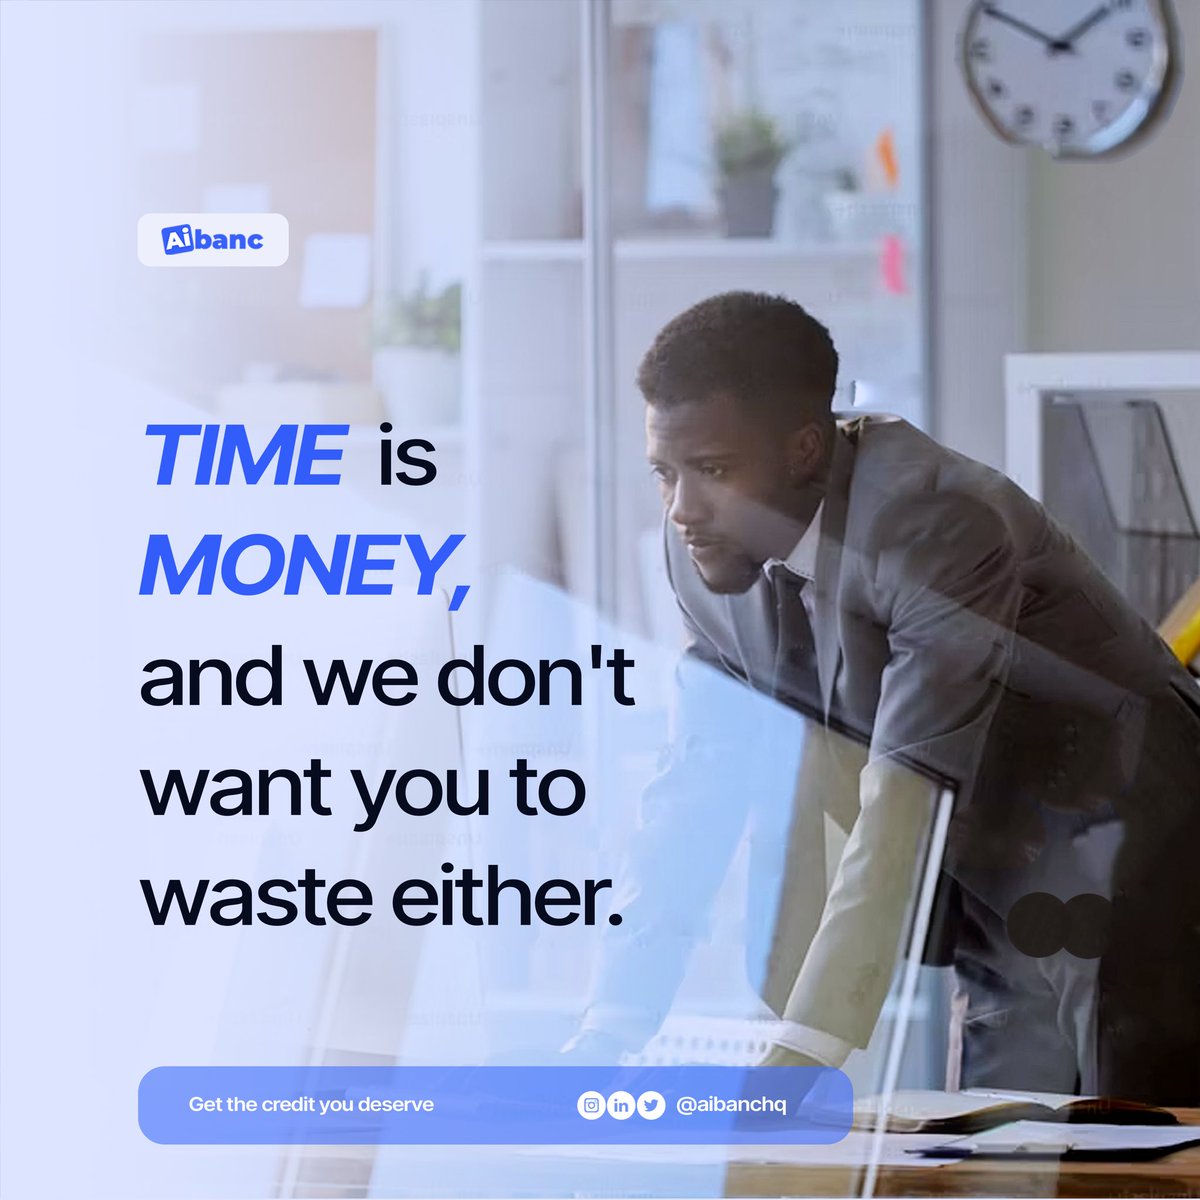 With Aibanc's quick approval process, you can get the funds you need when you need them. 

No waiting, just winning. Let's get started! 💼💡 

#aibanc #nigeriansmes #businesscredit #entrepreneurs #SMEfinance #quickapproval